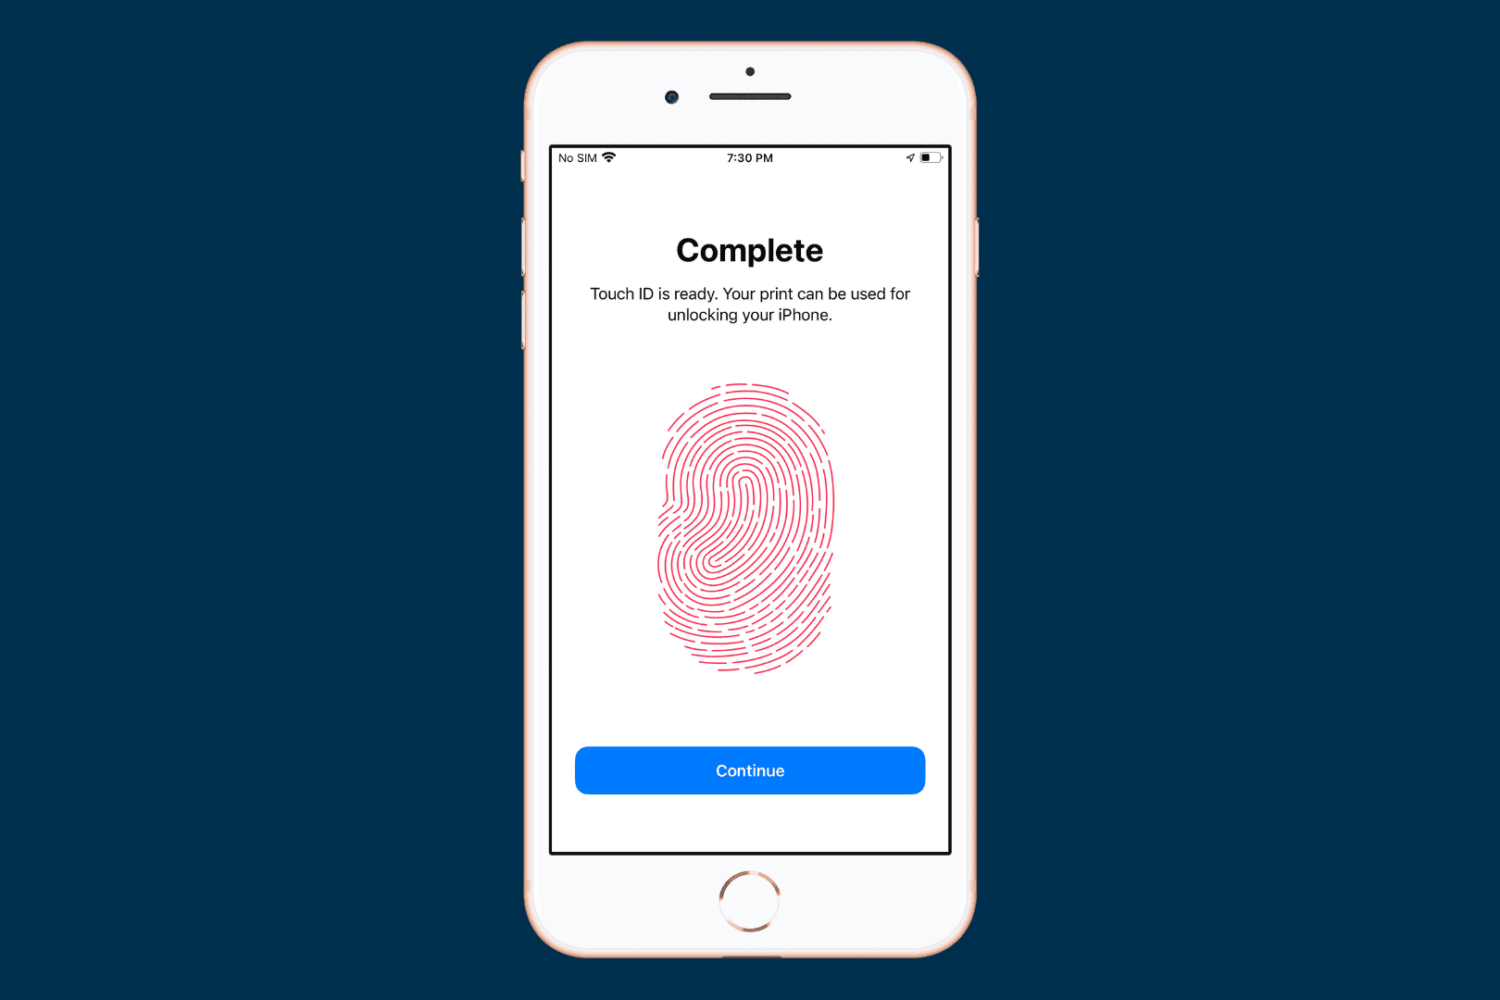 Touch ID is ready to use screen on iPhone